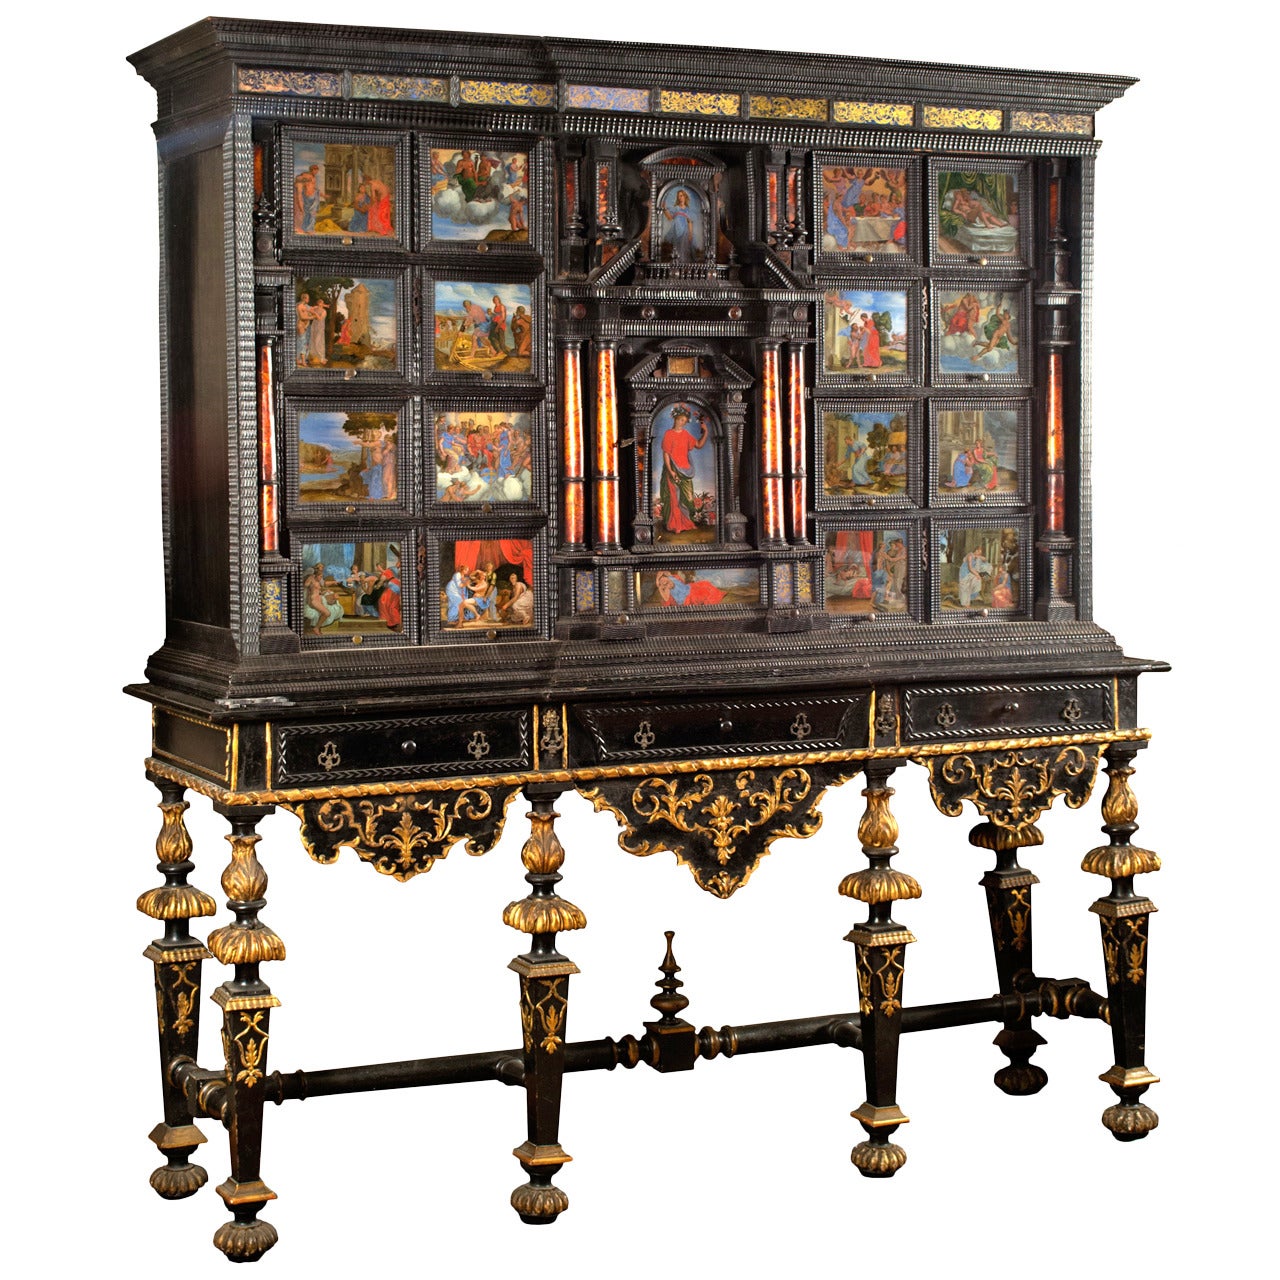 17th Century Cabinet on Stand with Églomisé Panels Depicting Cupid and Psyche